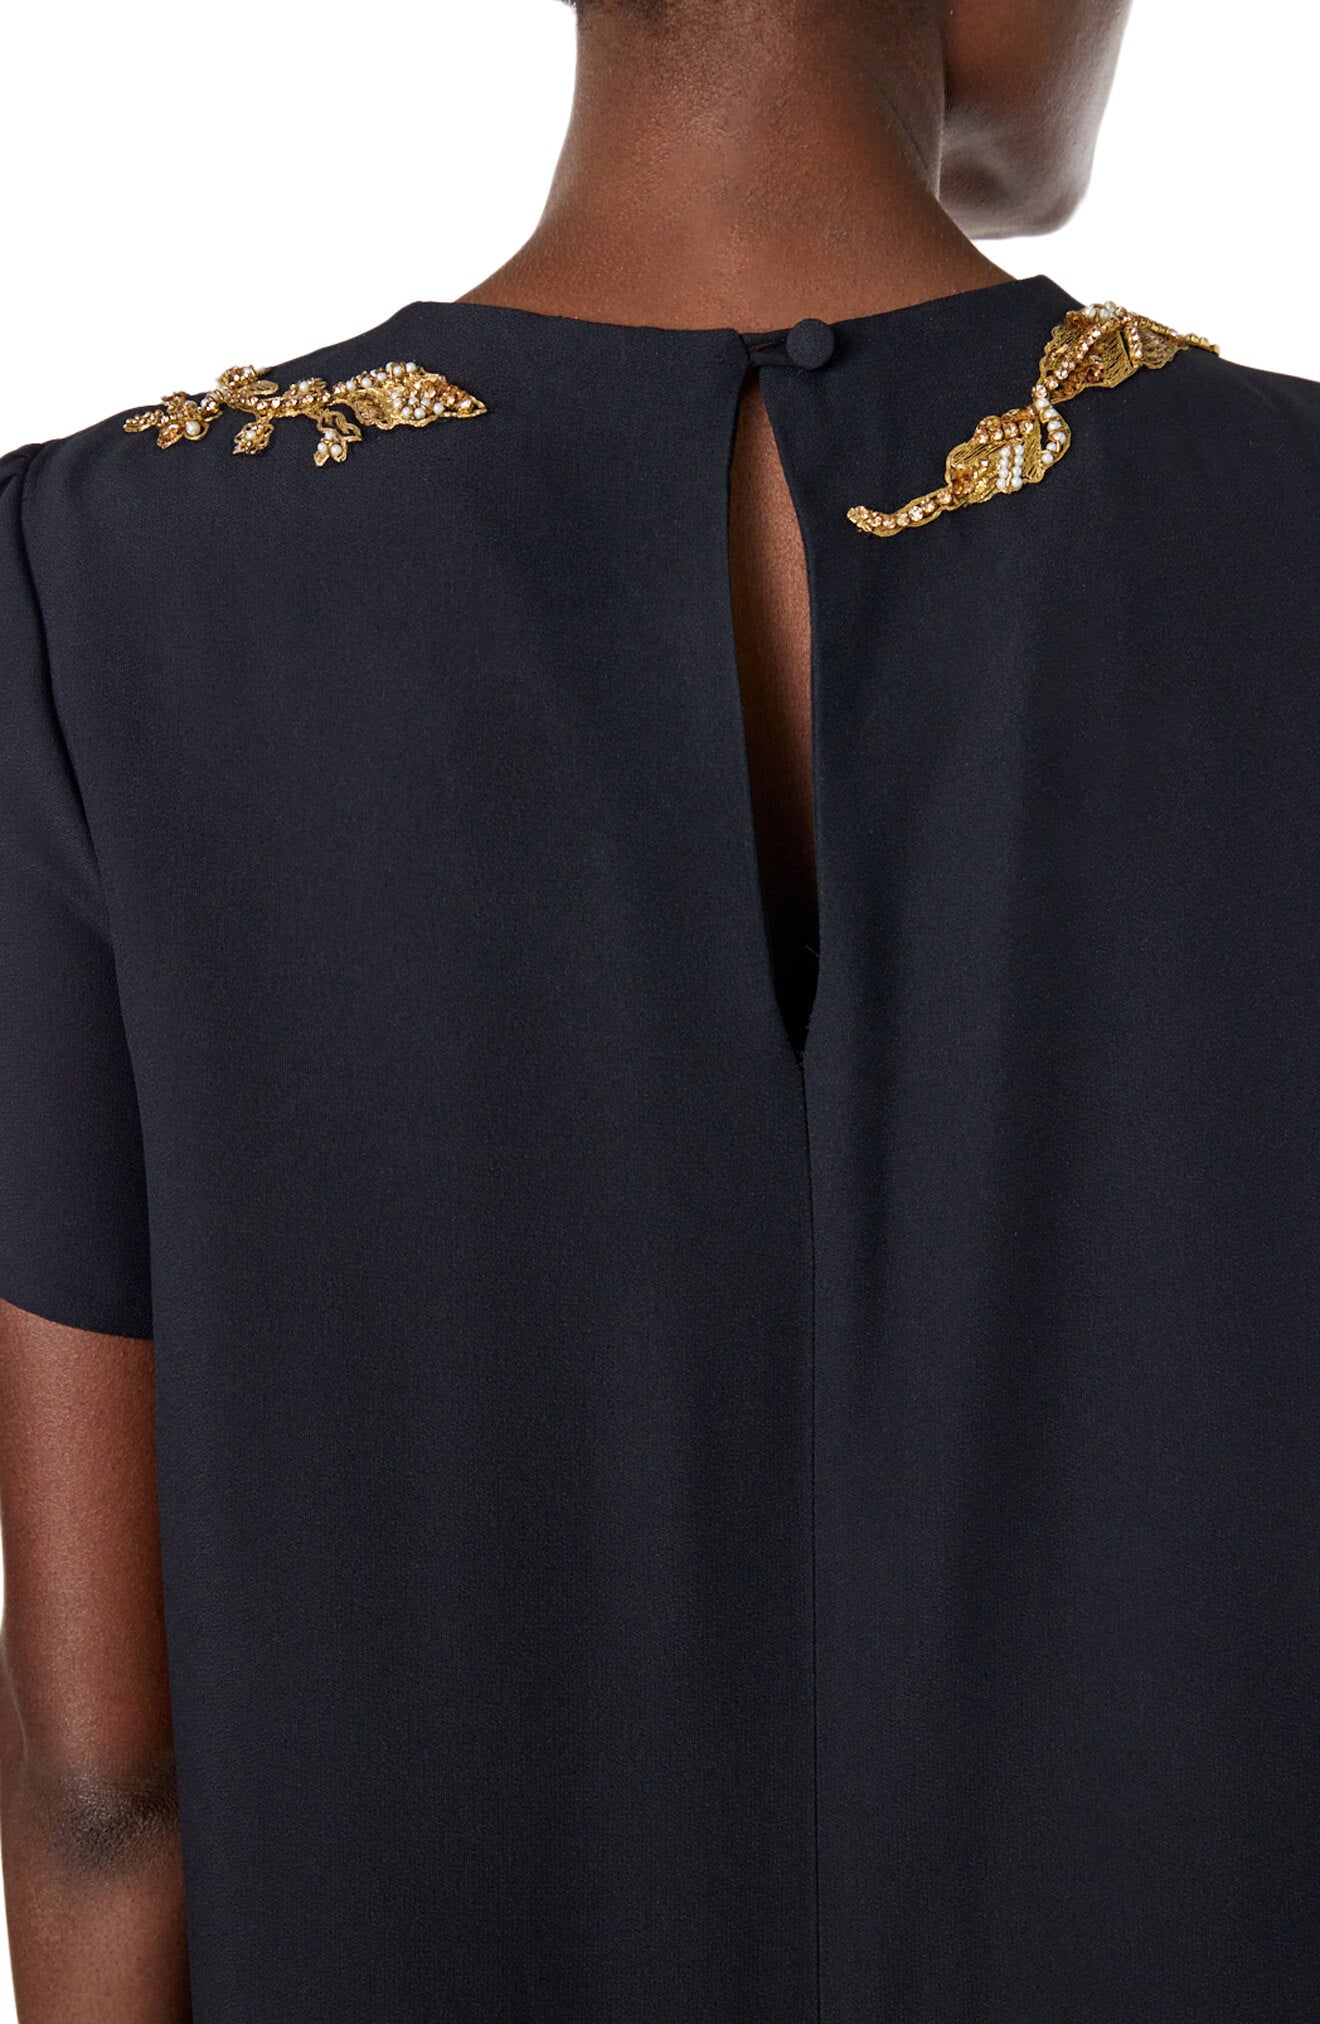 Monique Lhuillier black jewel neck, short sleeve caftan with gold embroidery.